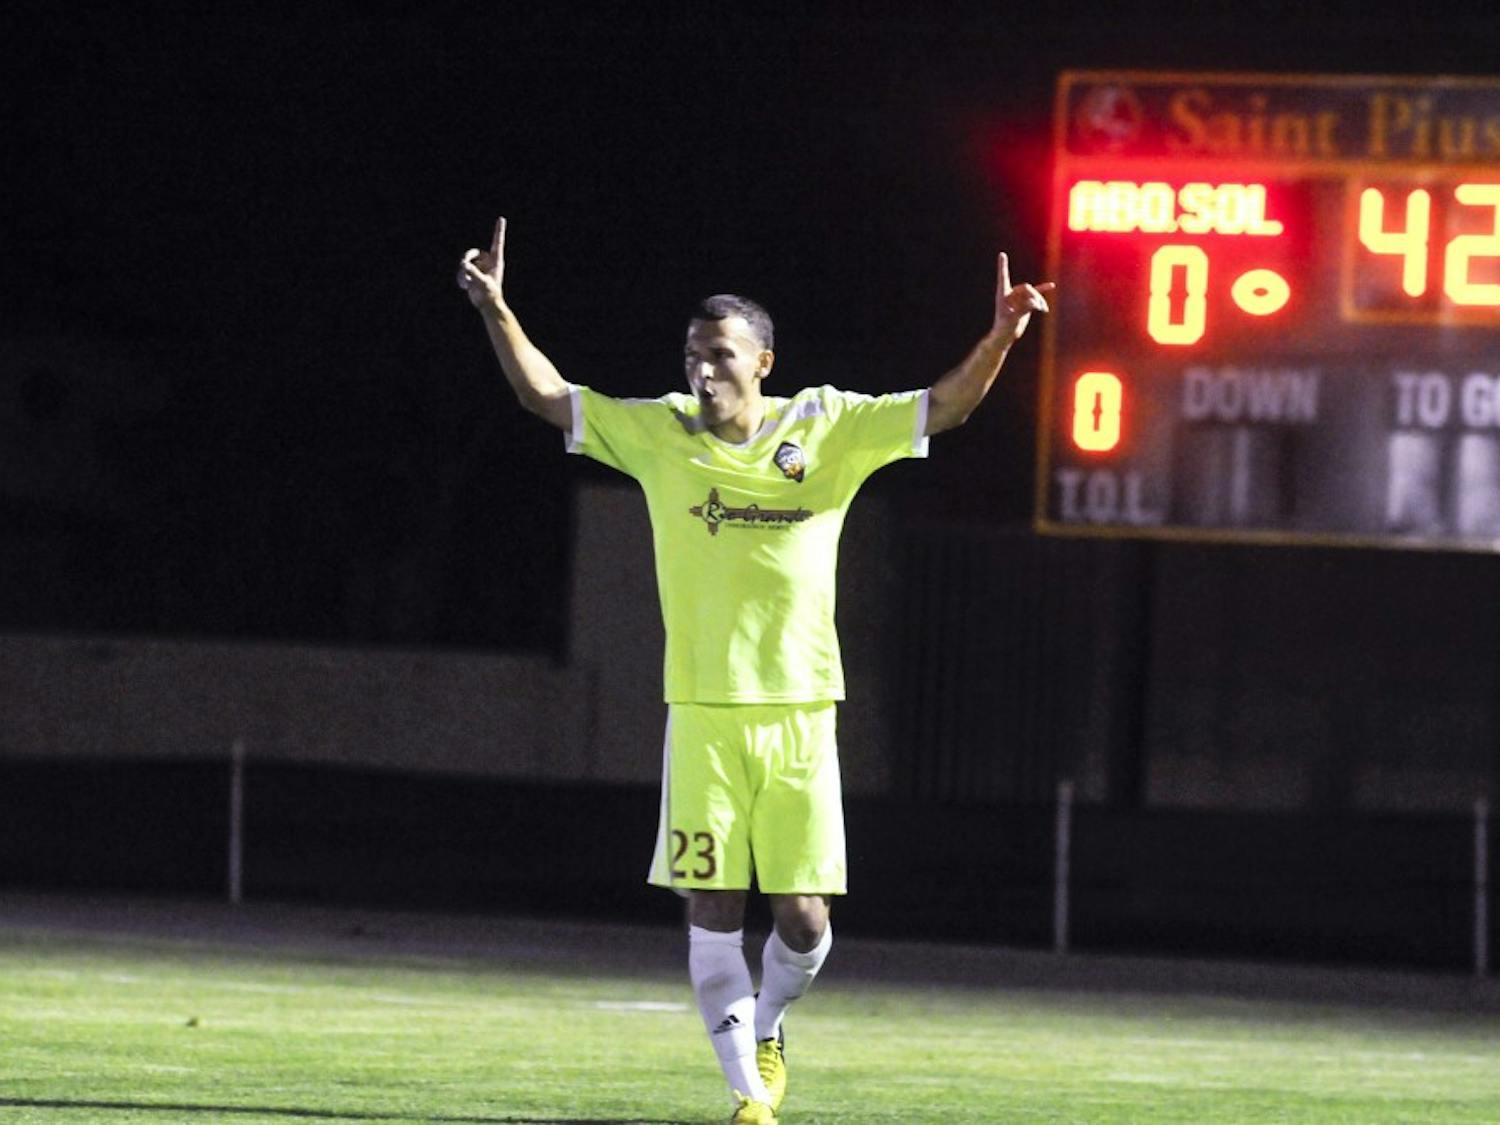 	Current Albuquerque Sol defender and former Lobo James Urbany celebrates after a goal against BYU at St. Pius X on Saturday. The Sol ended their first season with the Premier Development League by defeating the Cougars 2-1.